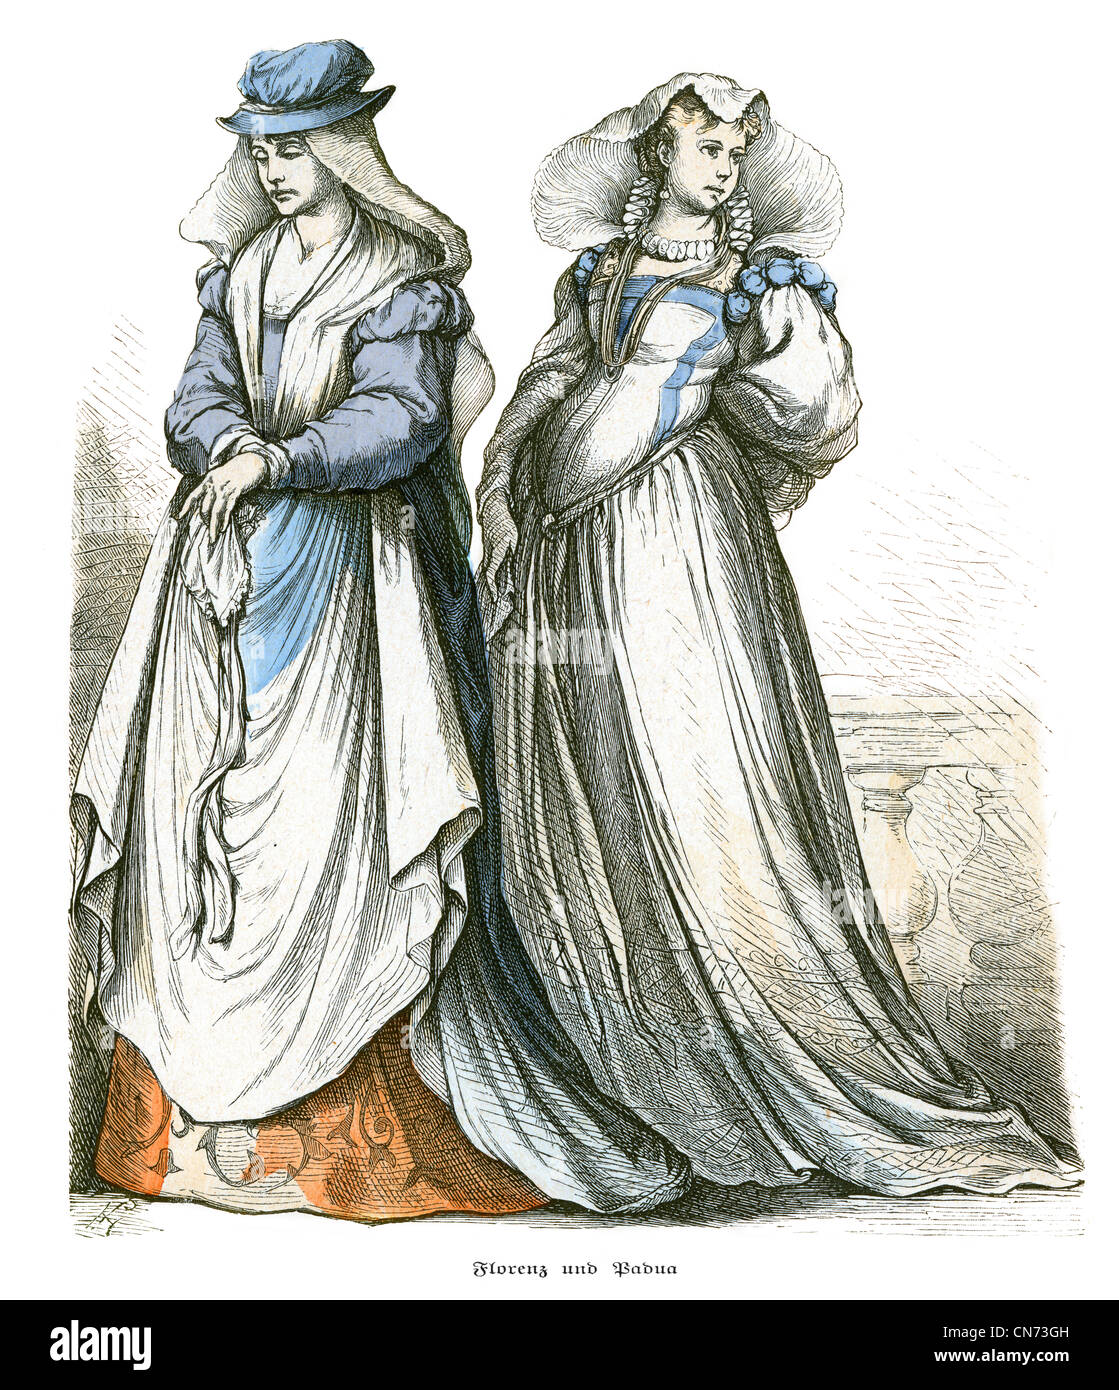 two women in the fashion of 18th Century Florence and Padua Stock Photo